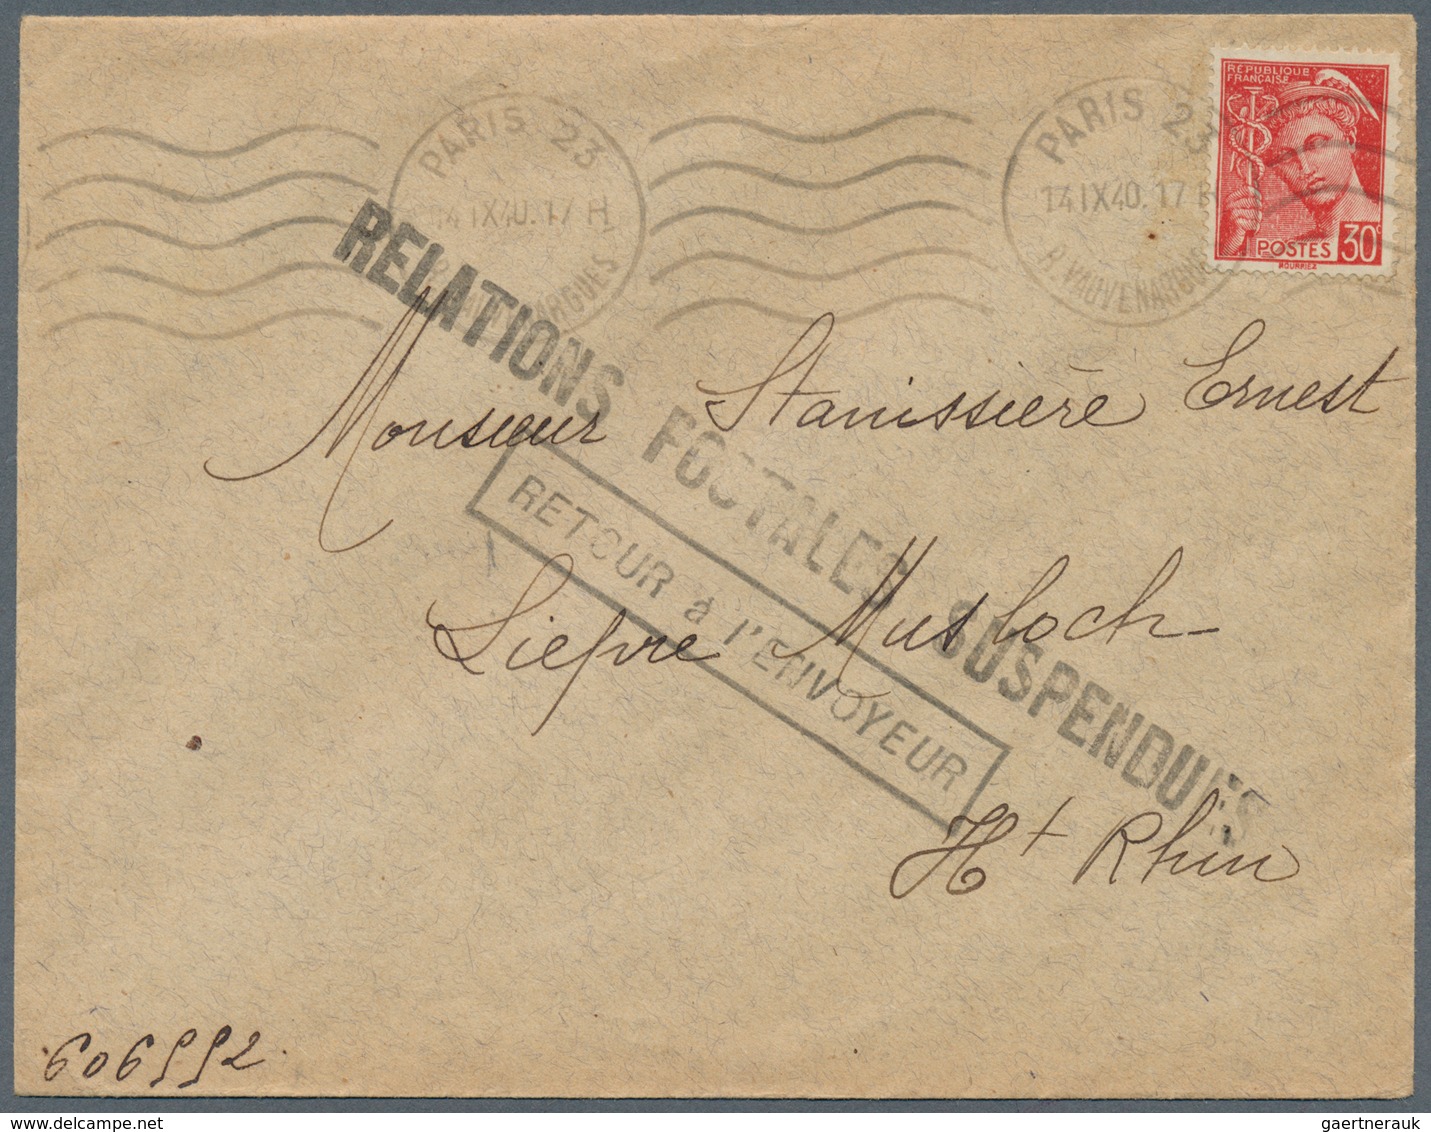 26529 Frankreich - Militärpost / Feldpost: 1808/1945 (ca.), unusual accumulation with 53 military covers i